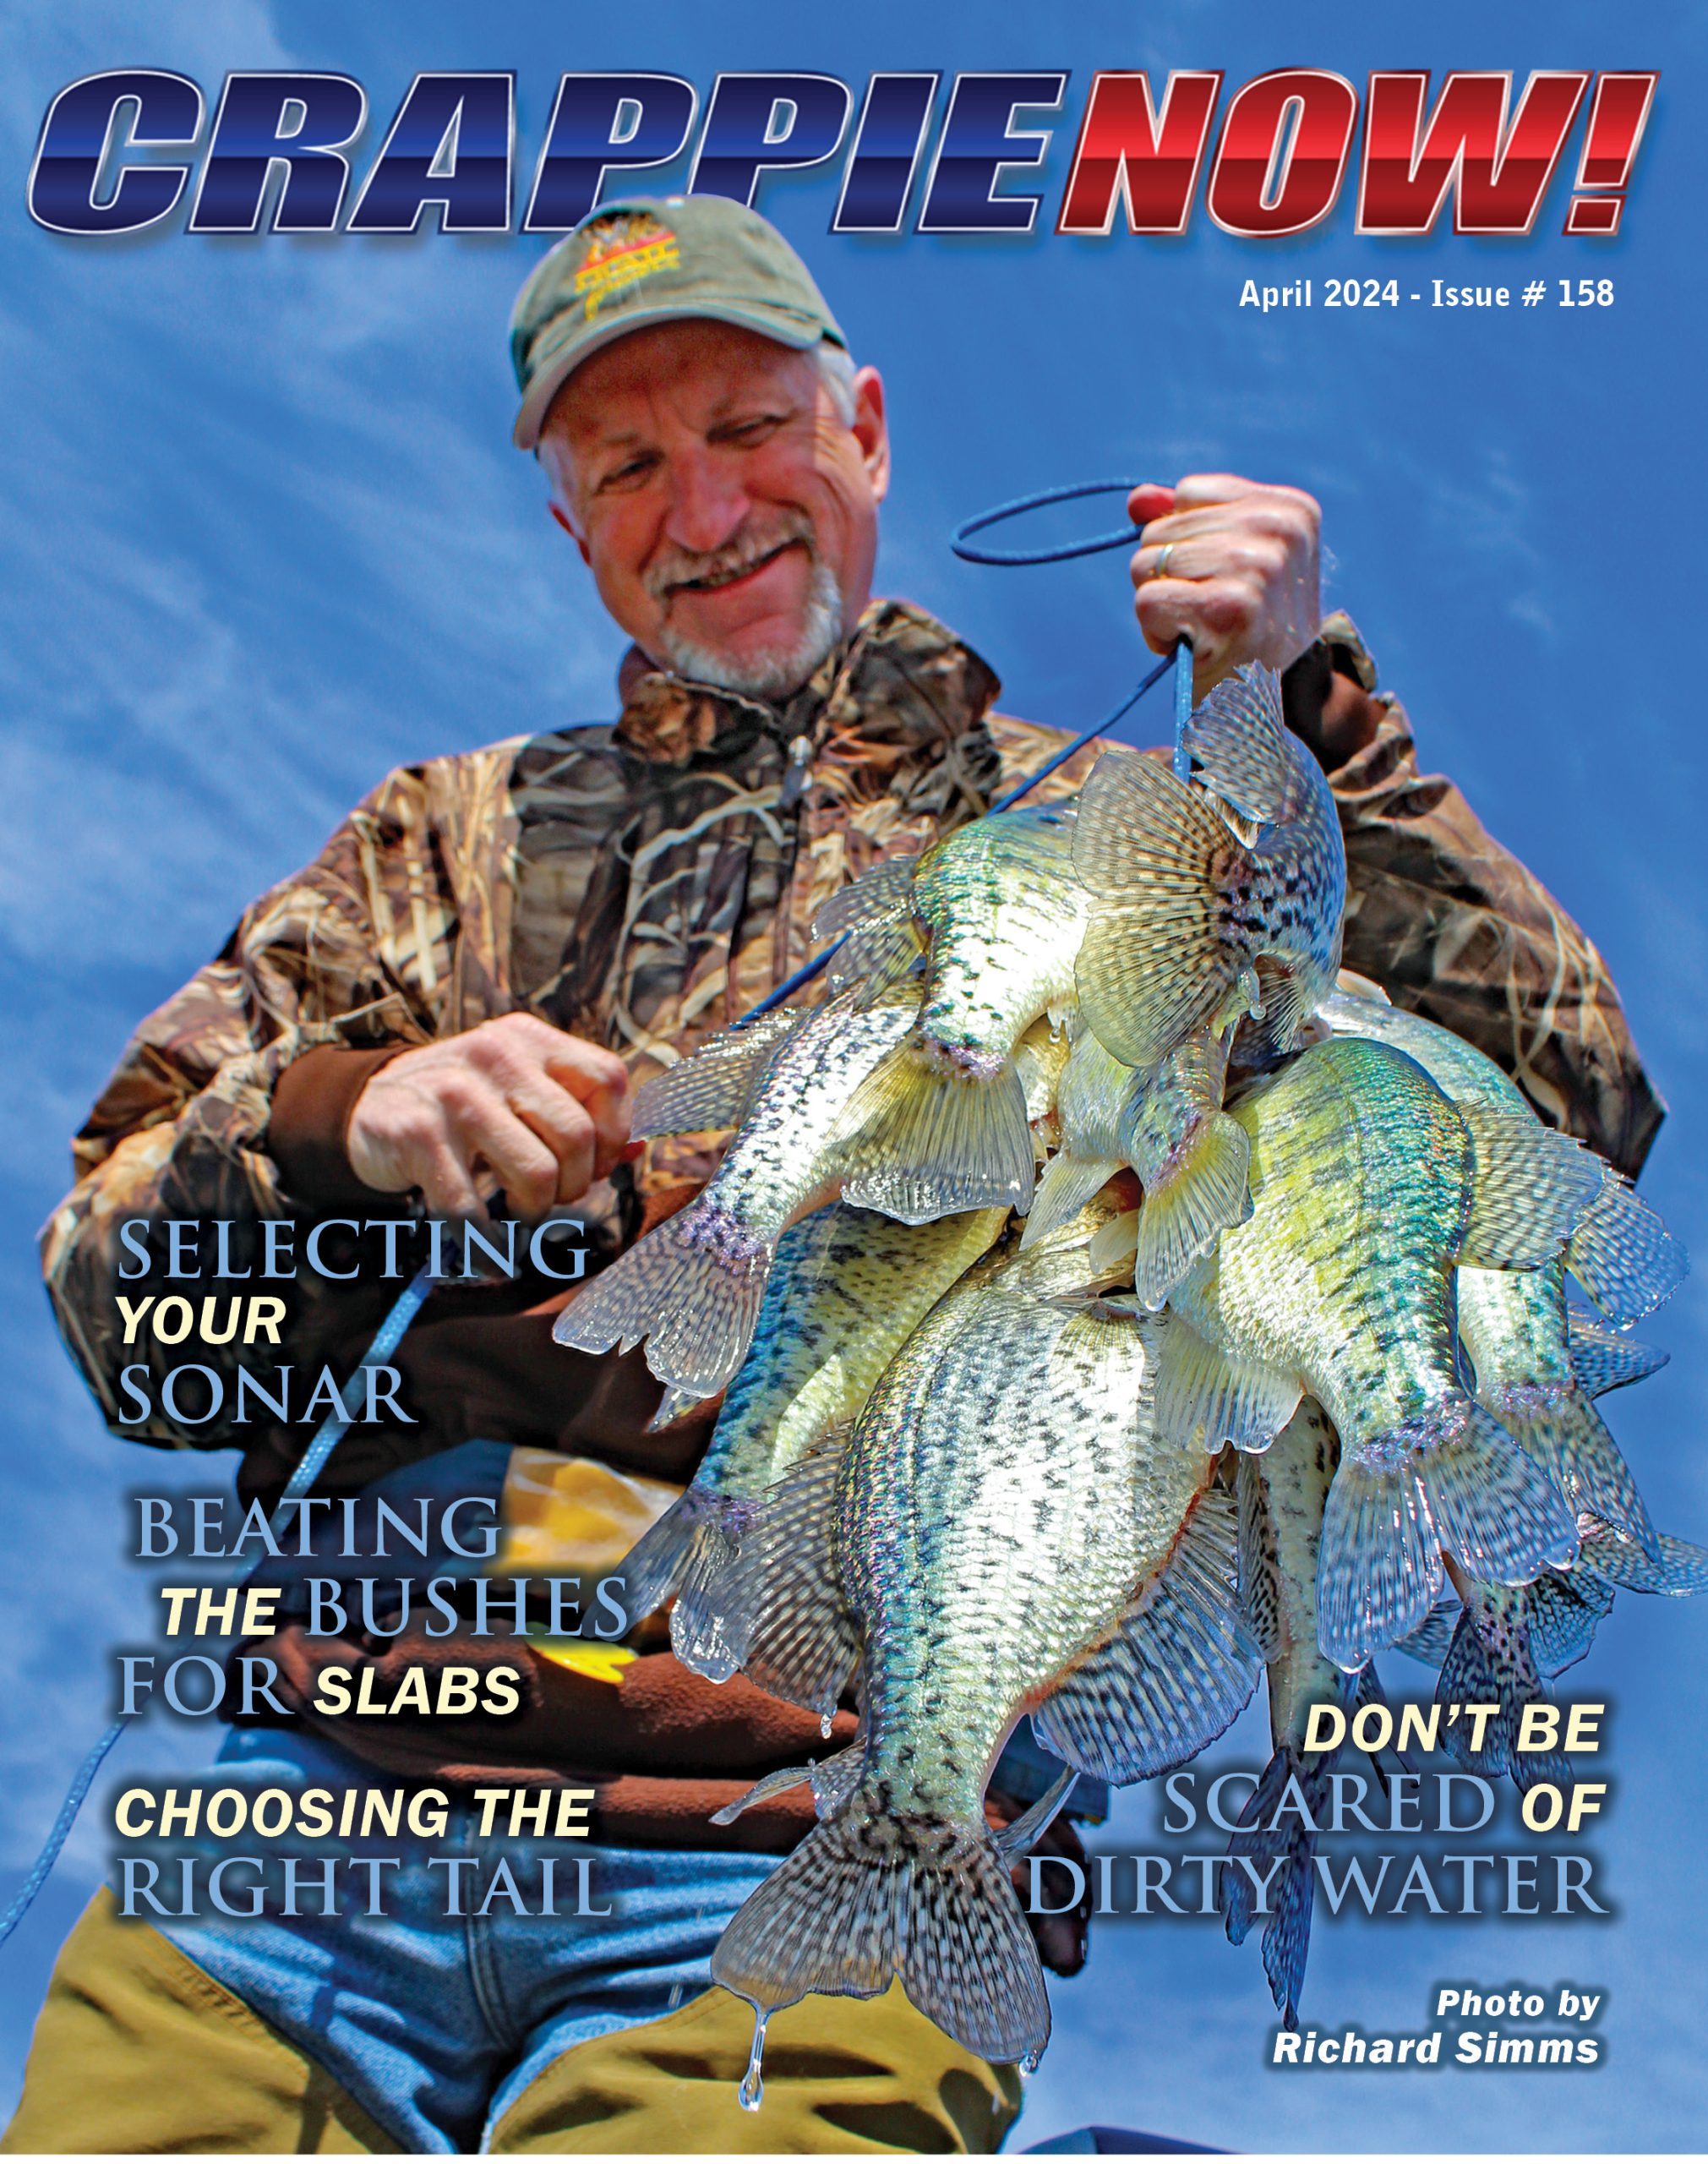 Muddy Water Won't Stop Your Crappie-Catching, by Ron Wong - Crappie Now